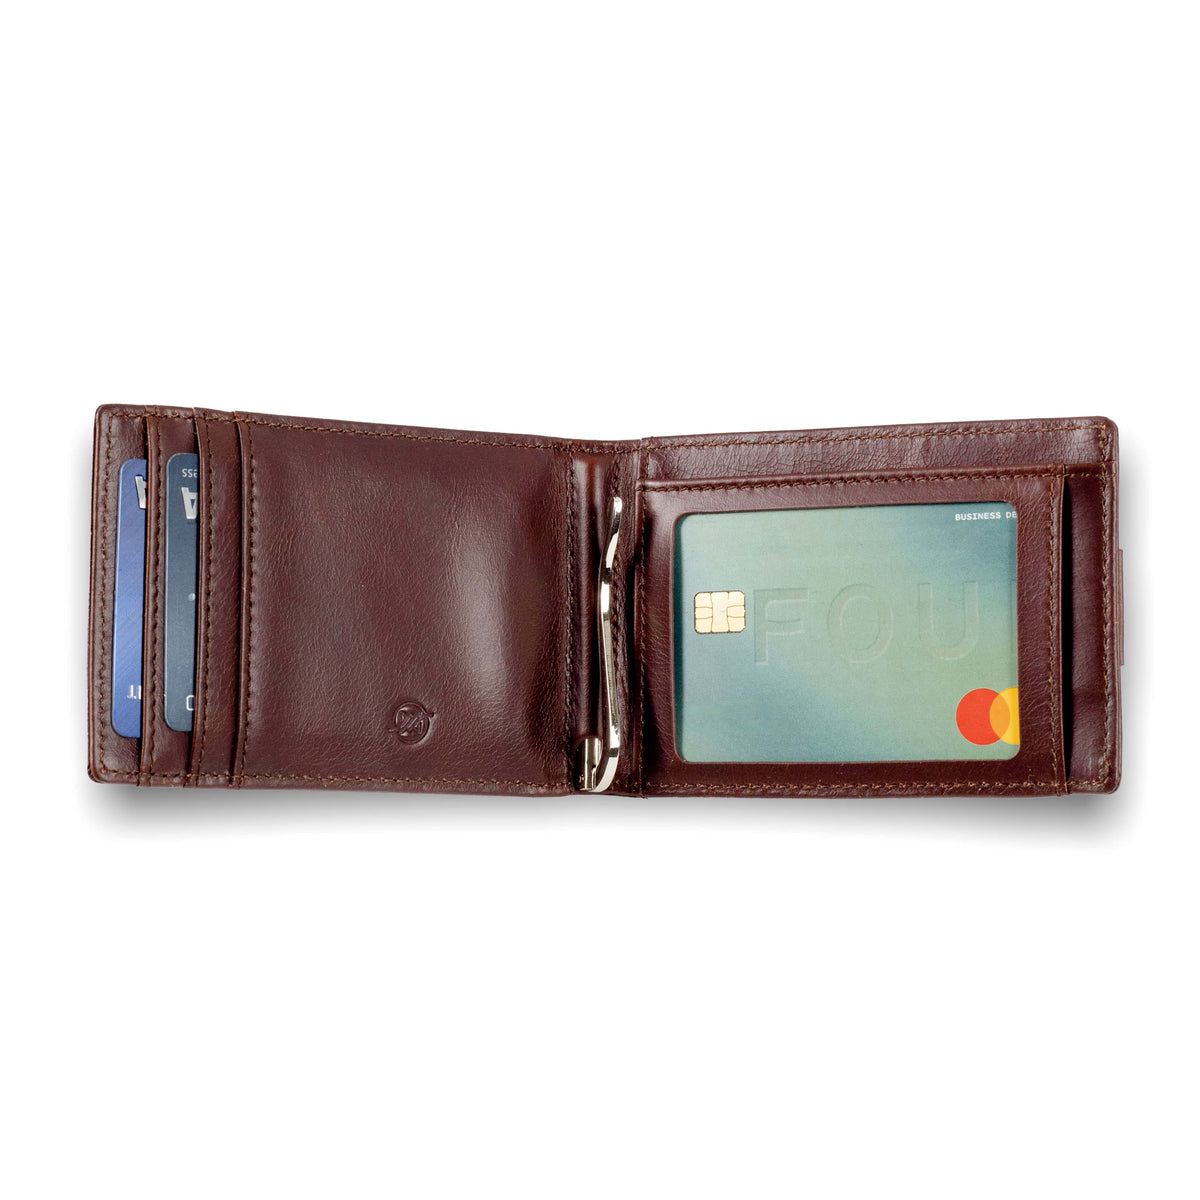 The Nomad V3. Minimalist One Piece Leather Wallet. Slim Wallet 